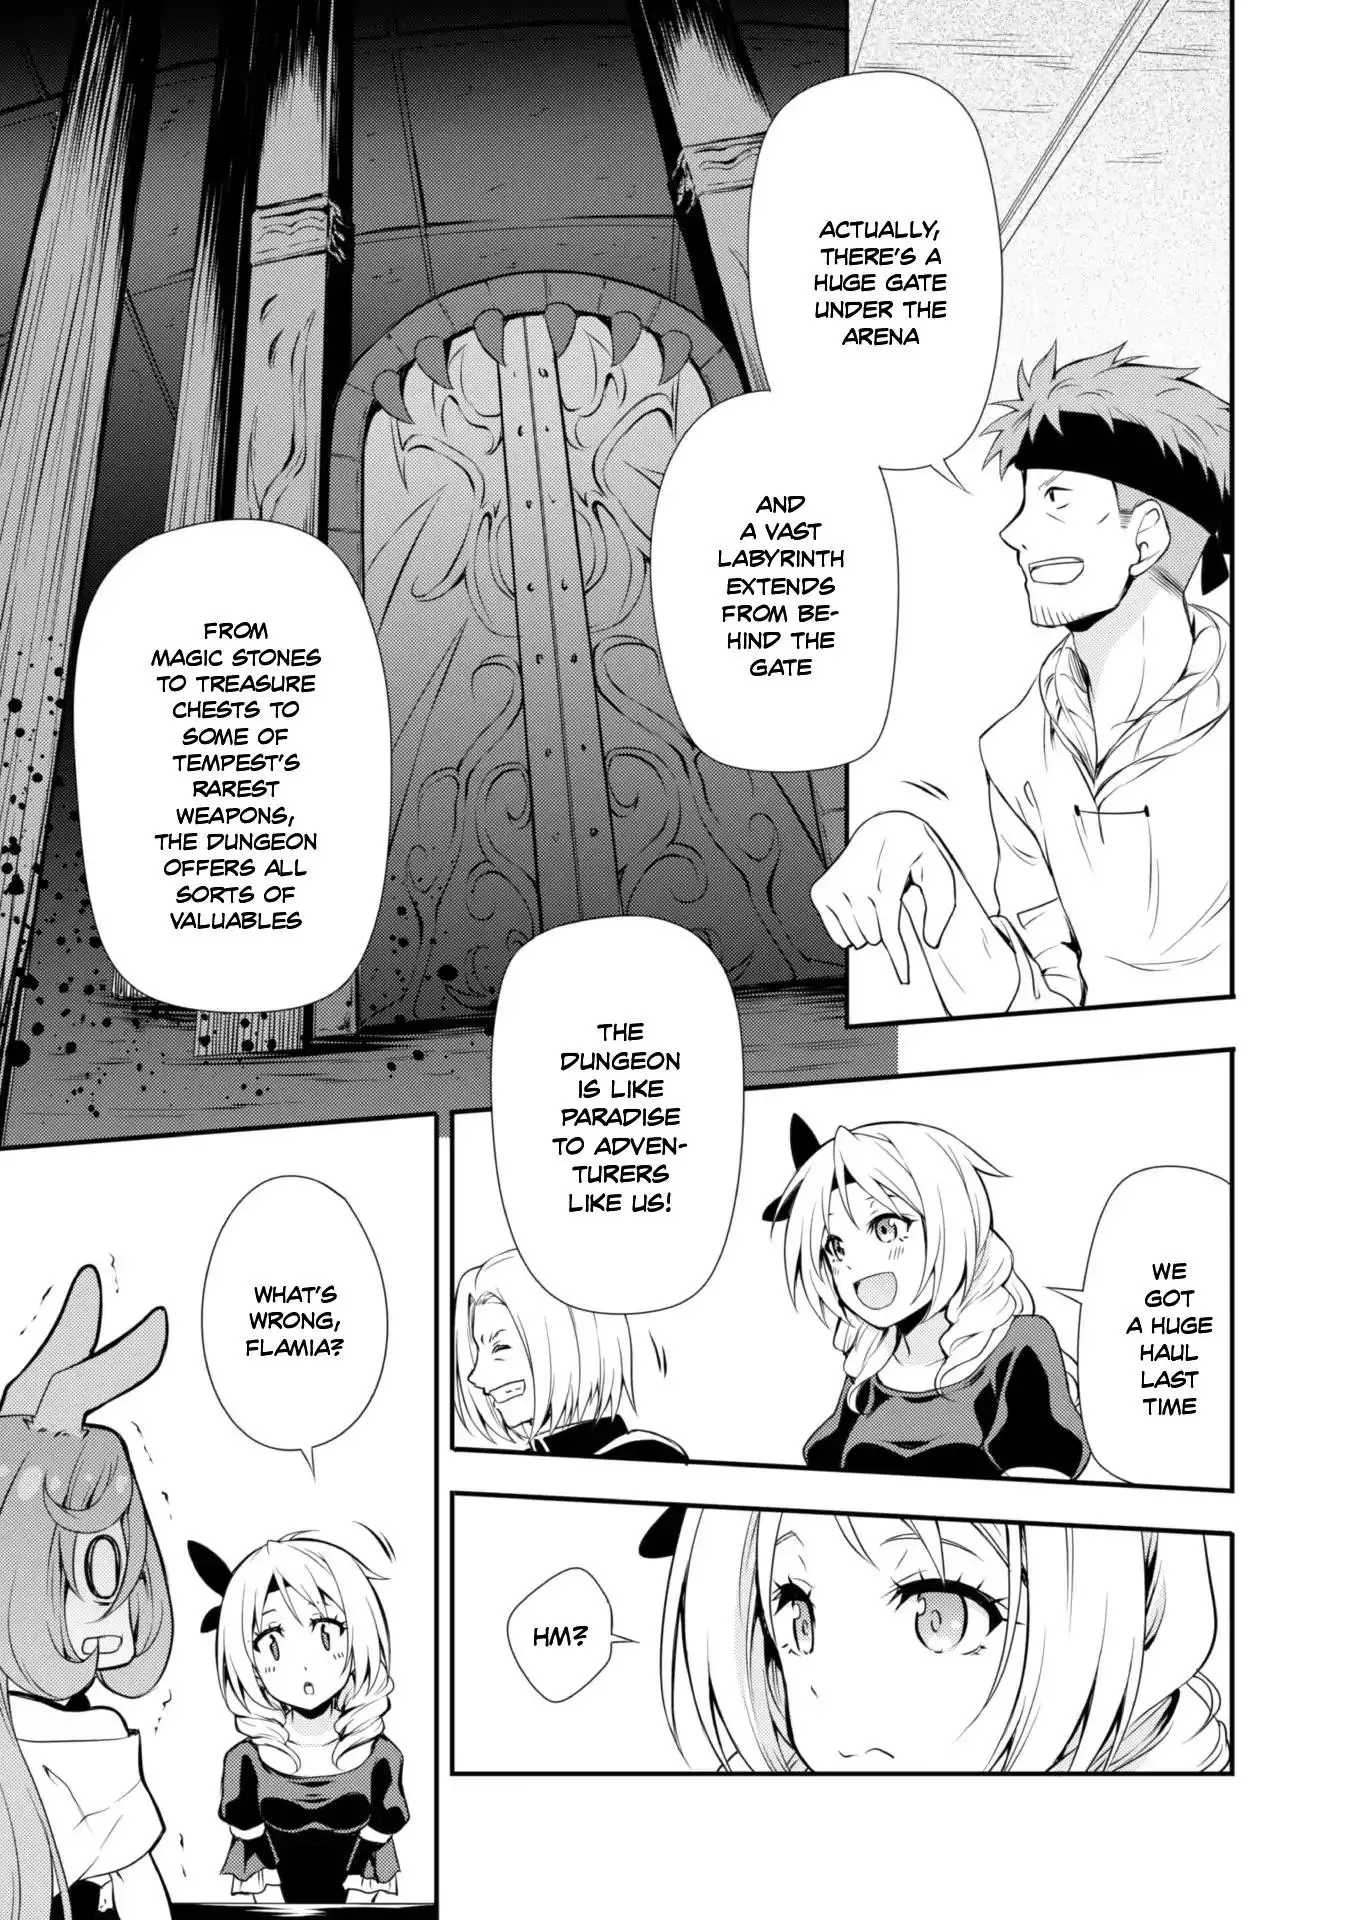 Tensei Shitara Slime Datta Ken: The Ways of Strolling in the Demon Country - 5 page 4